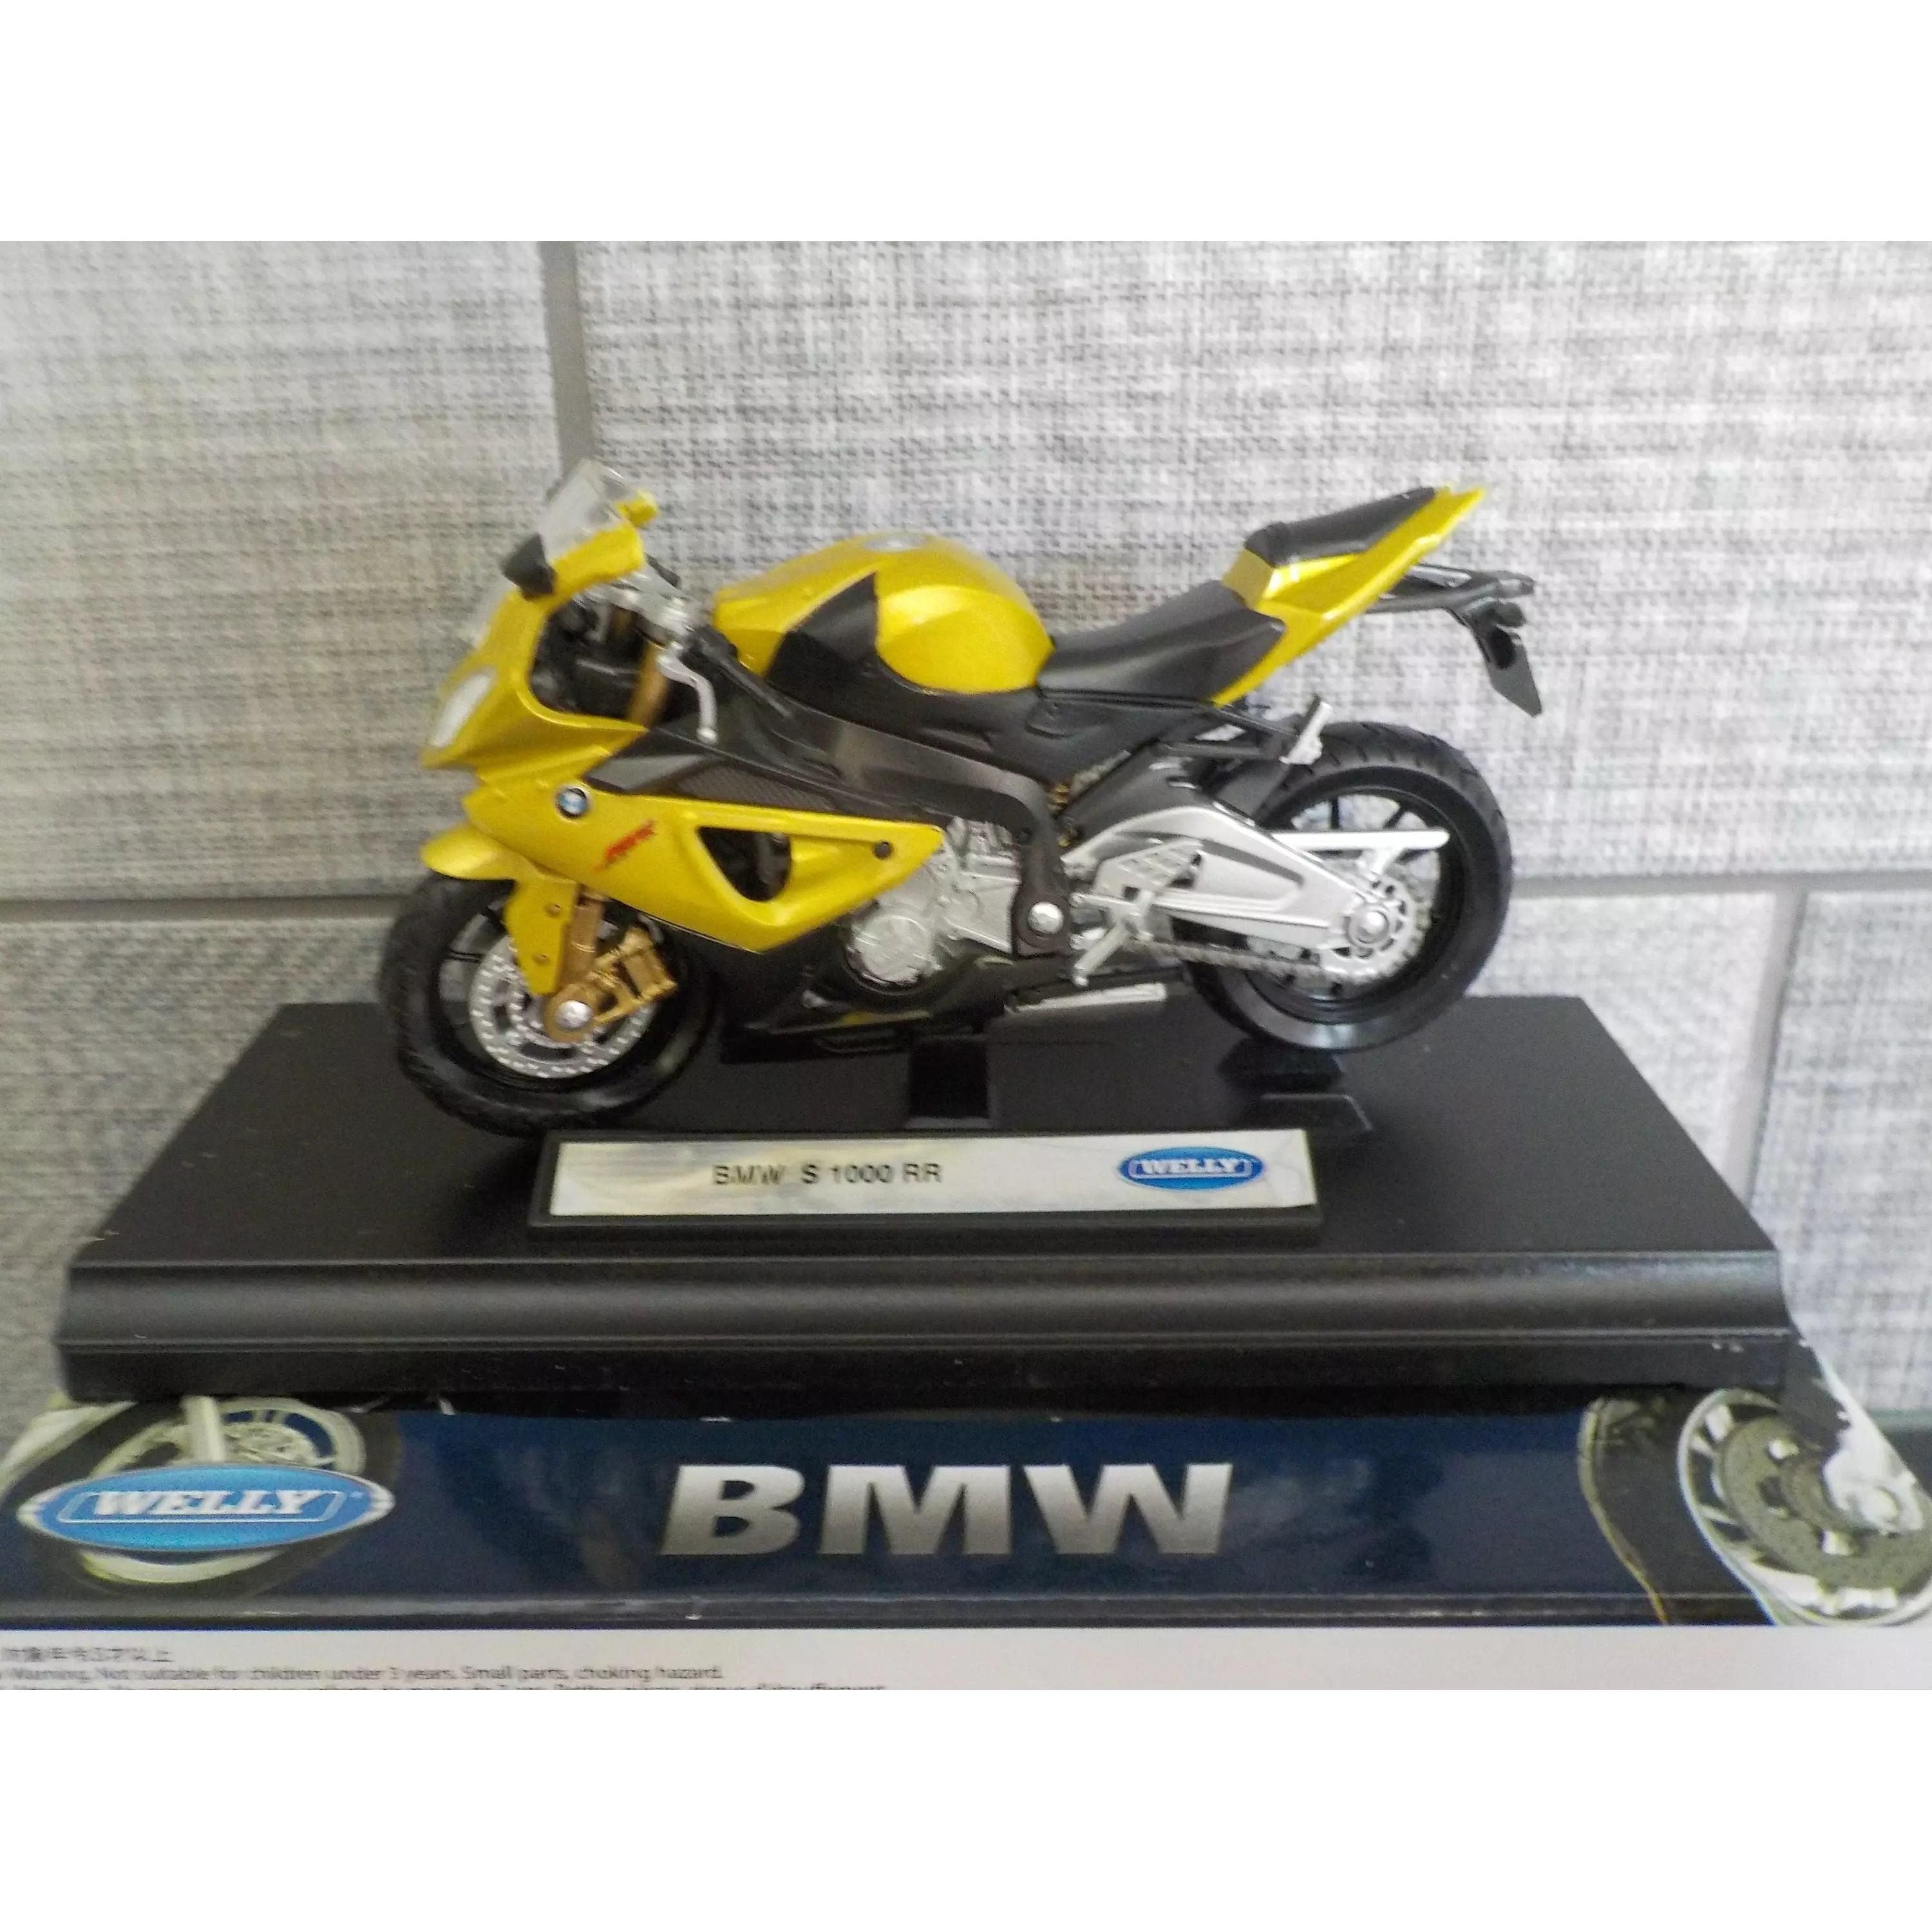 Welly Die Cast Motorcycle Yellow BMW S 1000 RR 1:18 Scale - BumbleToys - 14 Years & Up, 5-7 Years, 8+ Years, 8-13 Years, Bike, Boys, Motorcycle, Pre-Order